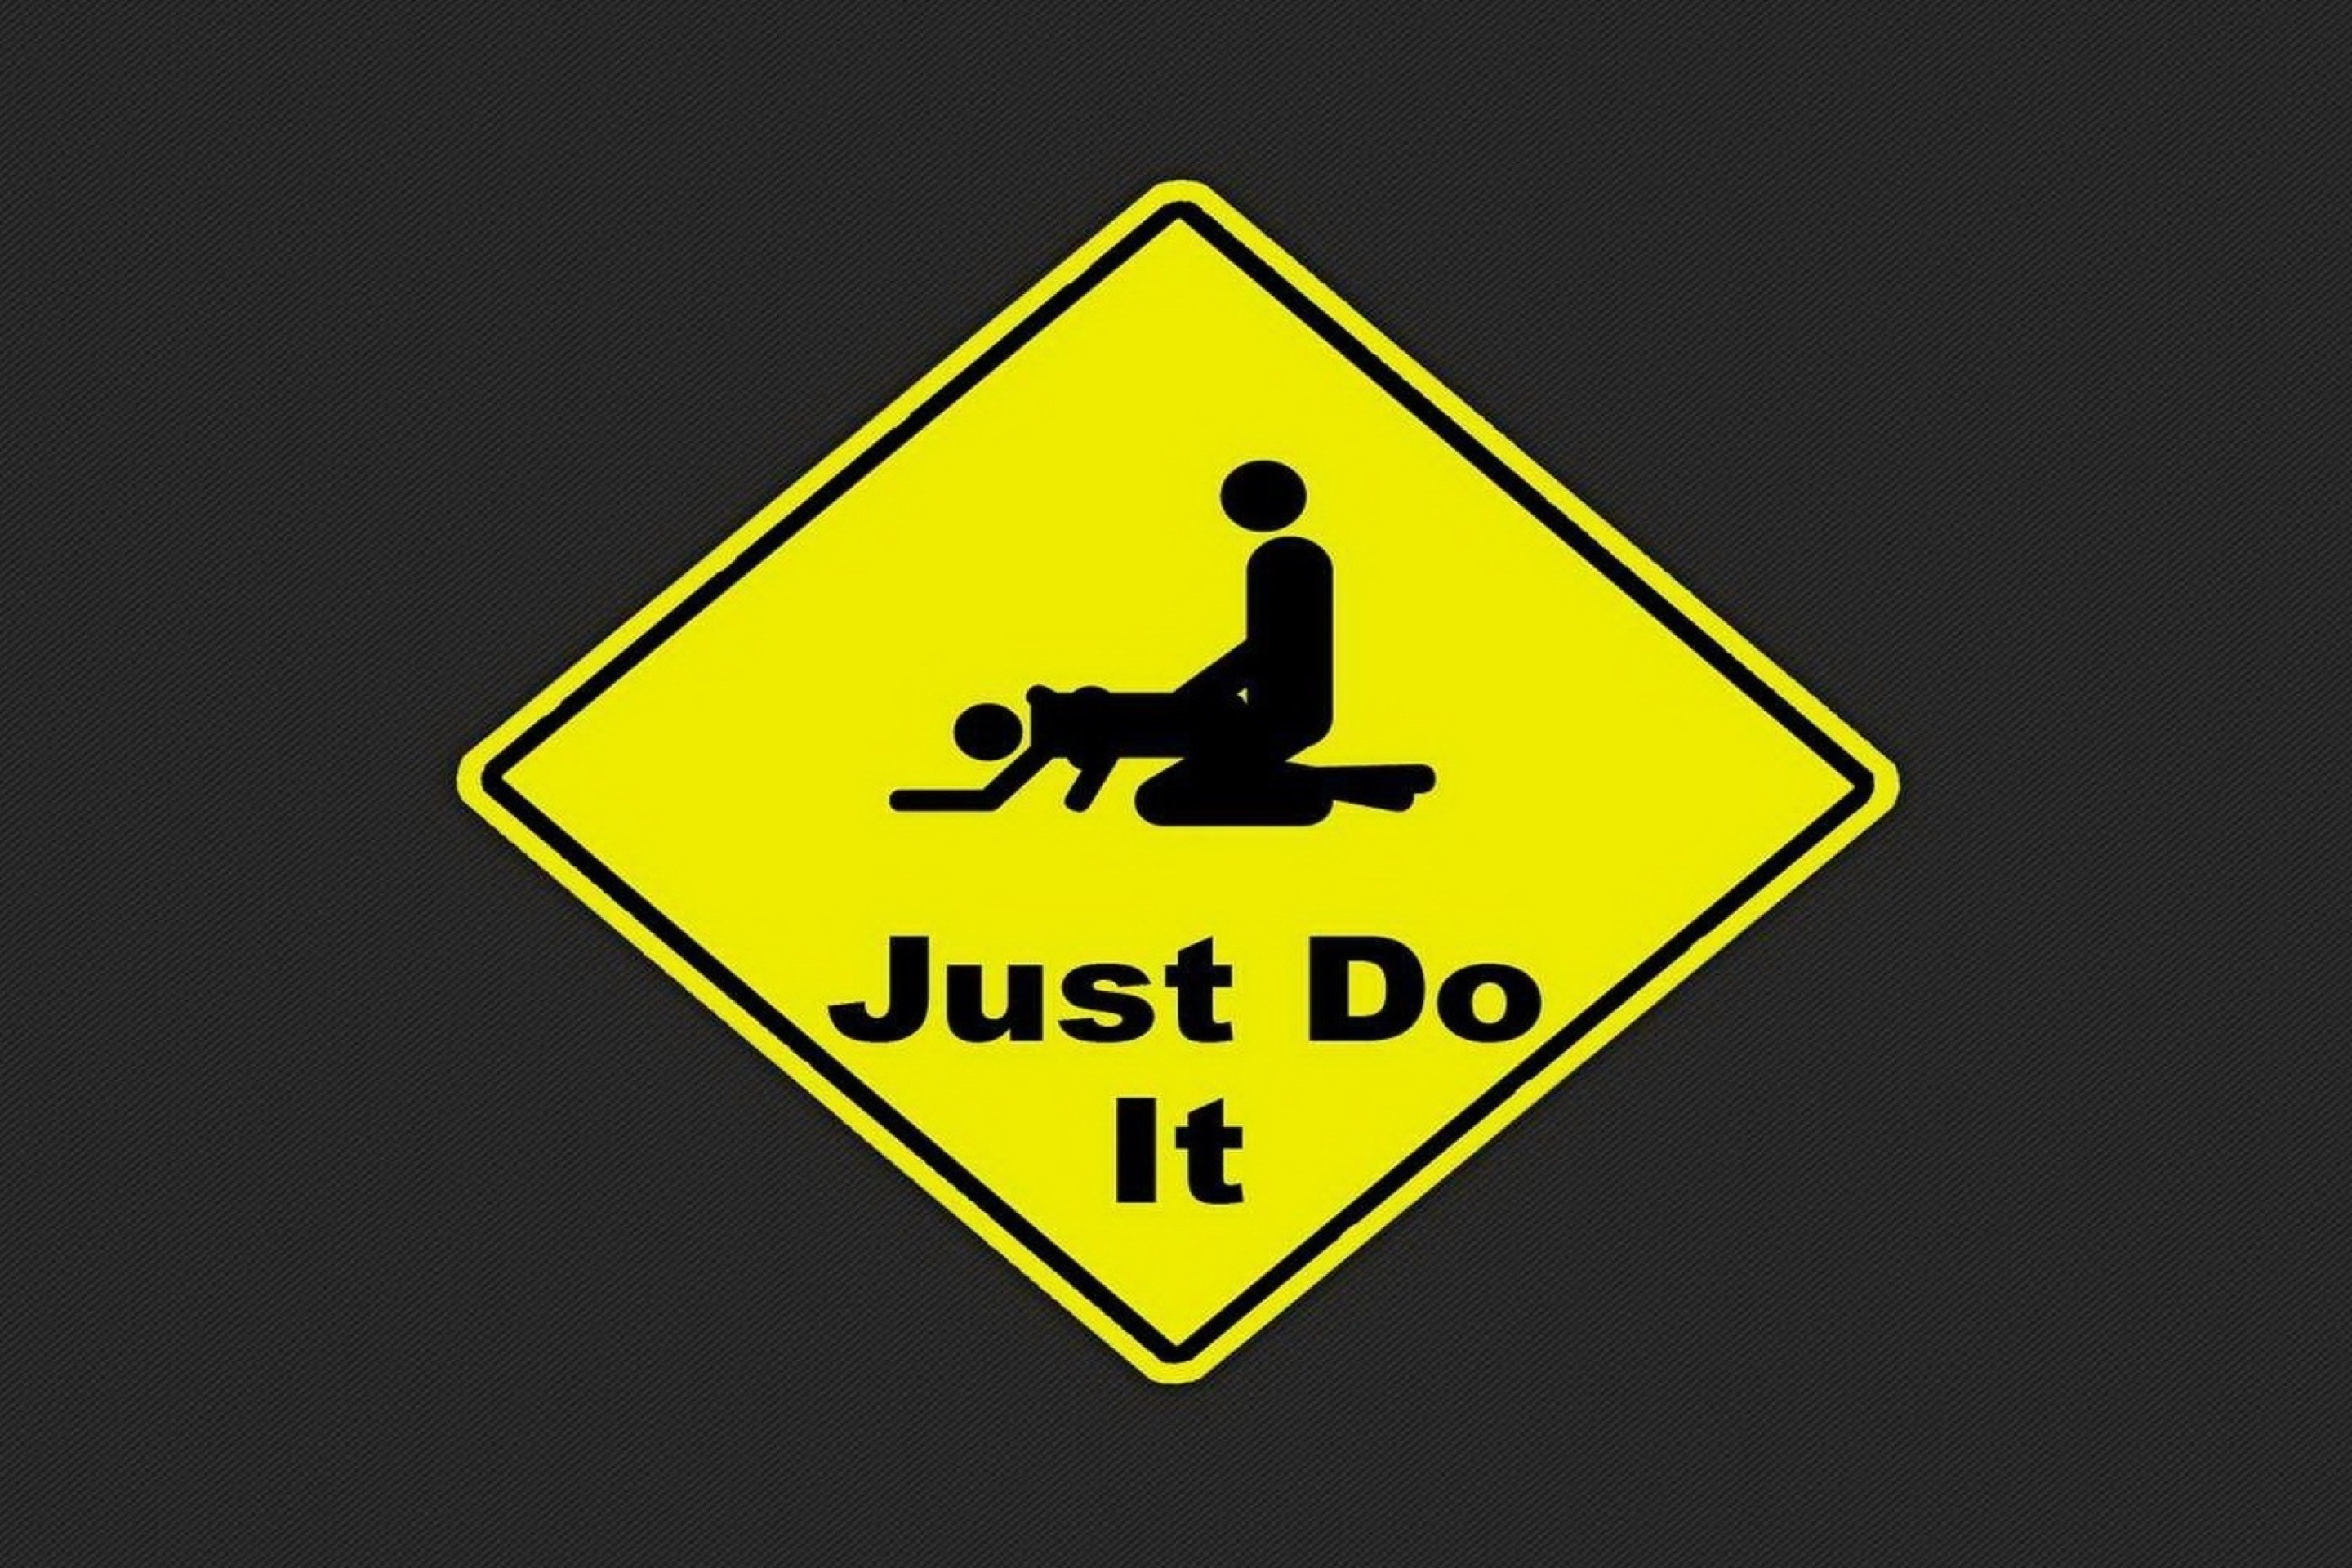 Just Do It Funny Sign screenshot #1 2880x1920